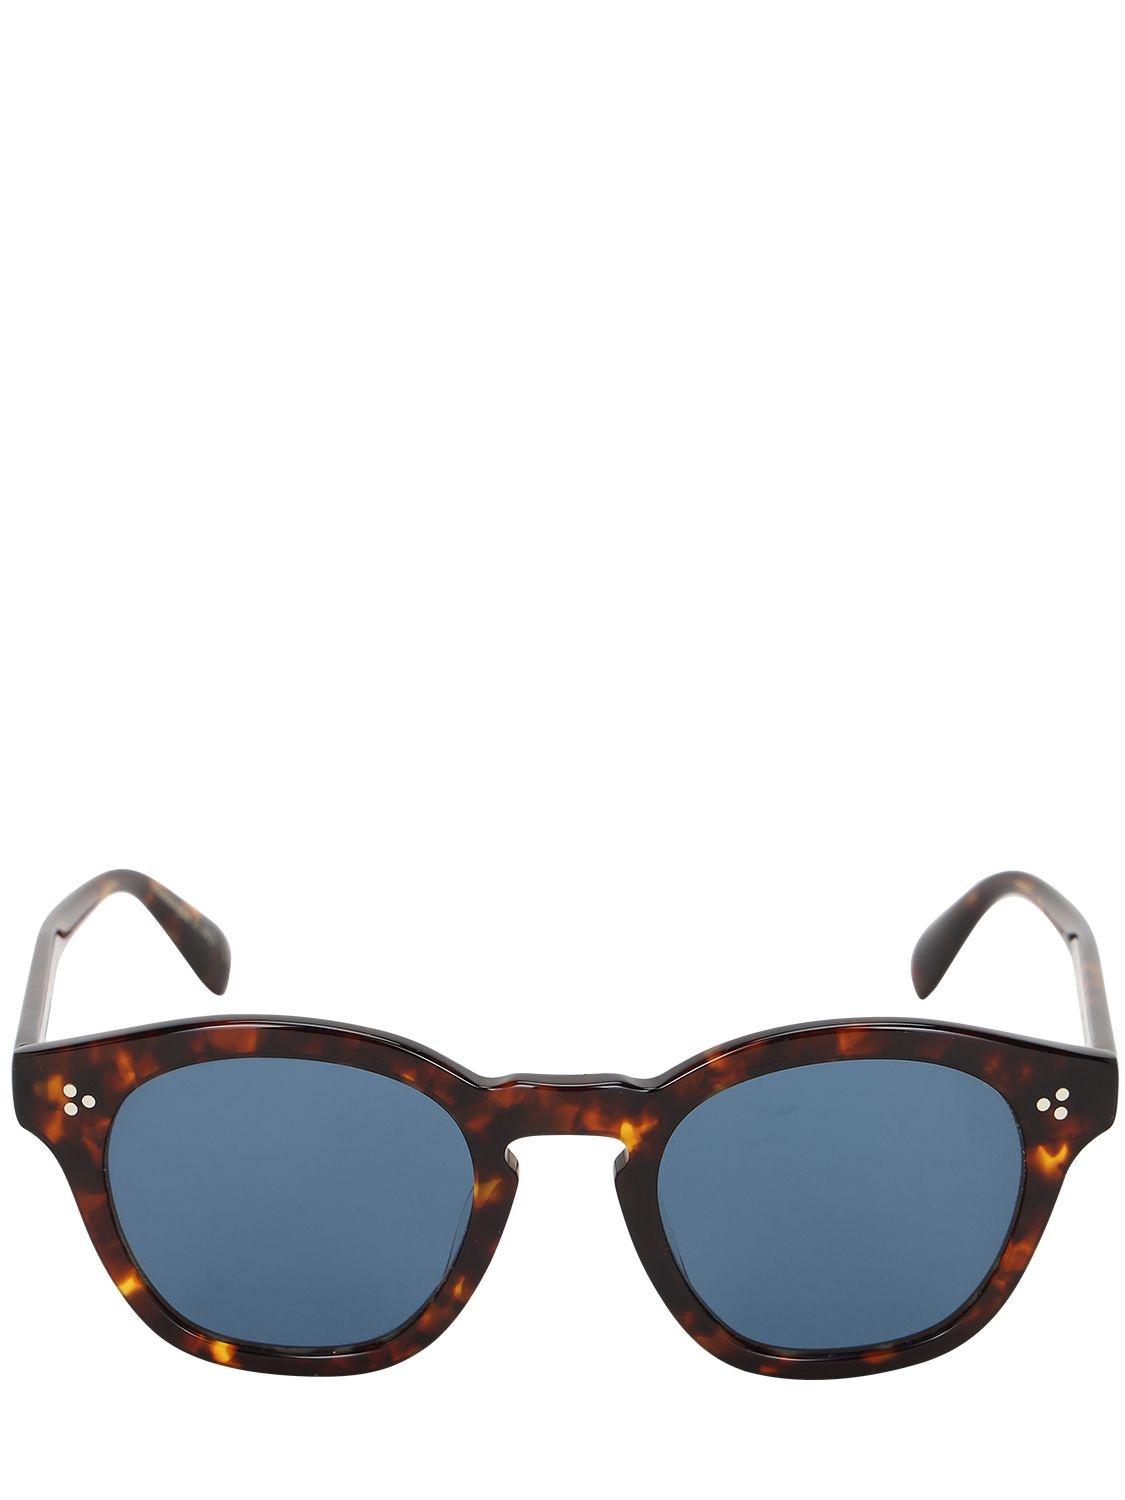 Oliver Peoples Boudreau L.a Round Acetate Sunglasses In Tortoise/blue